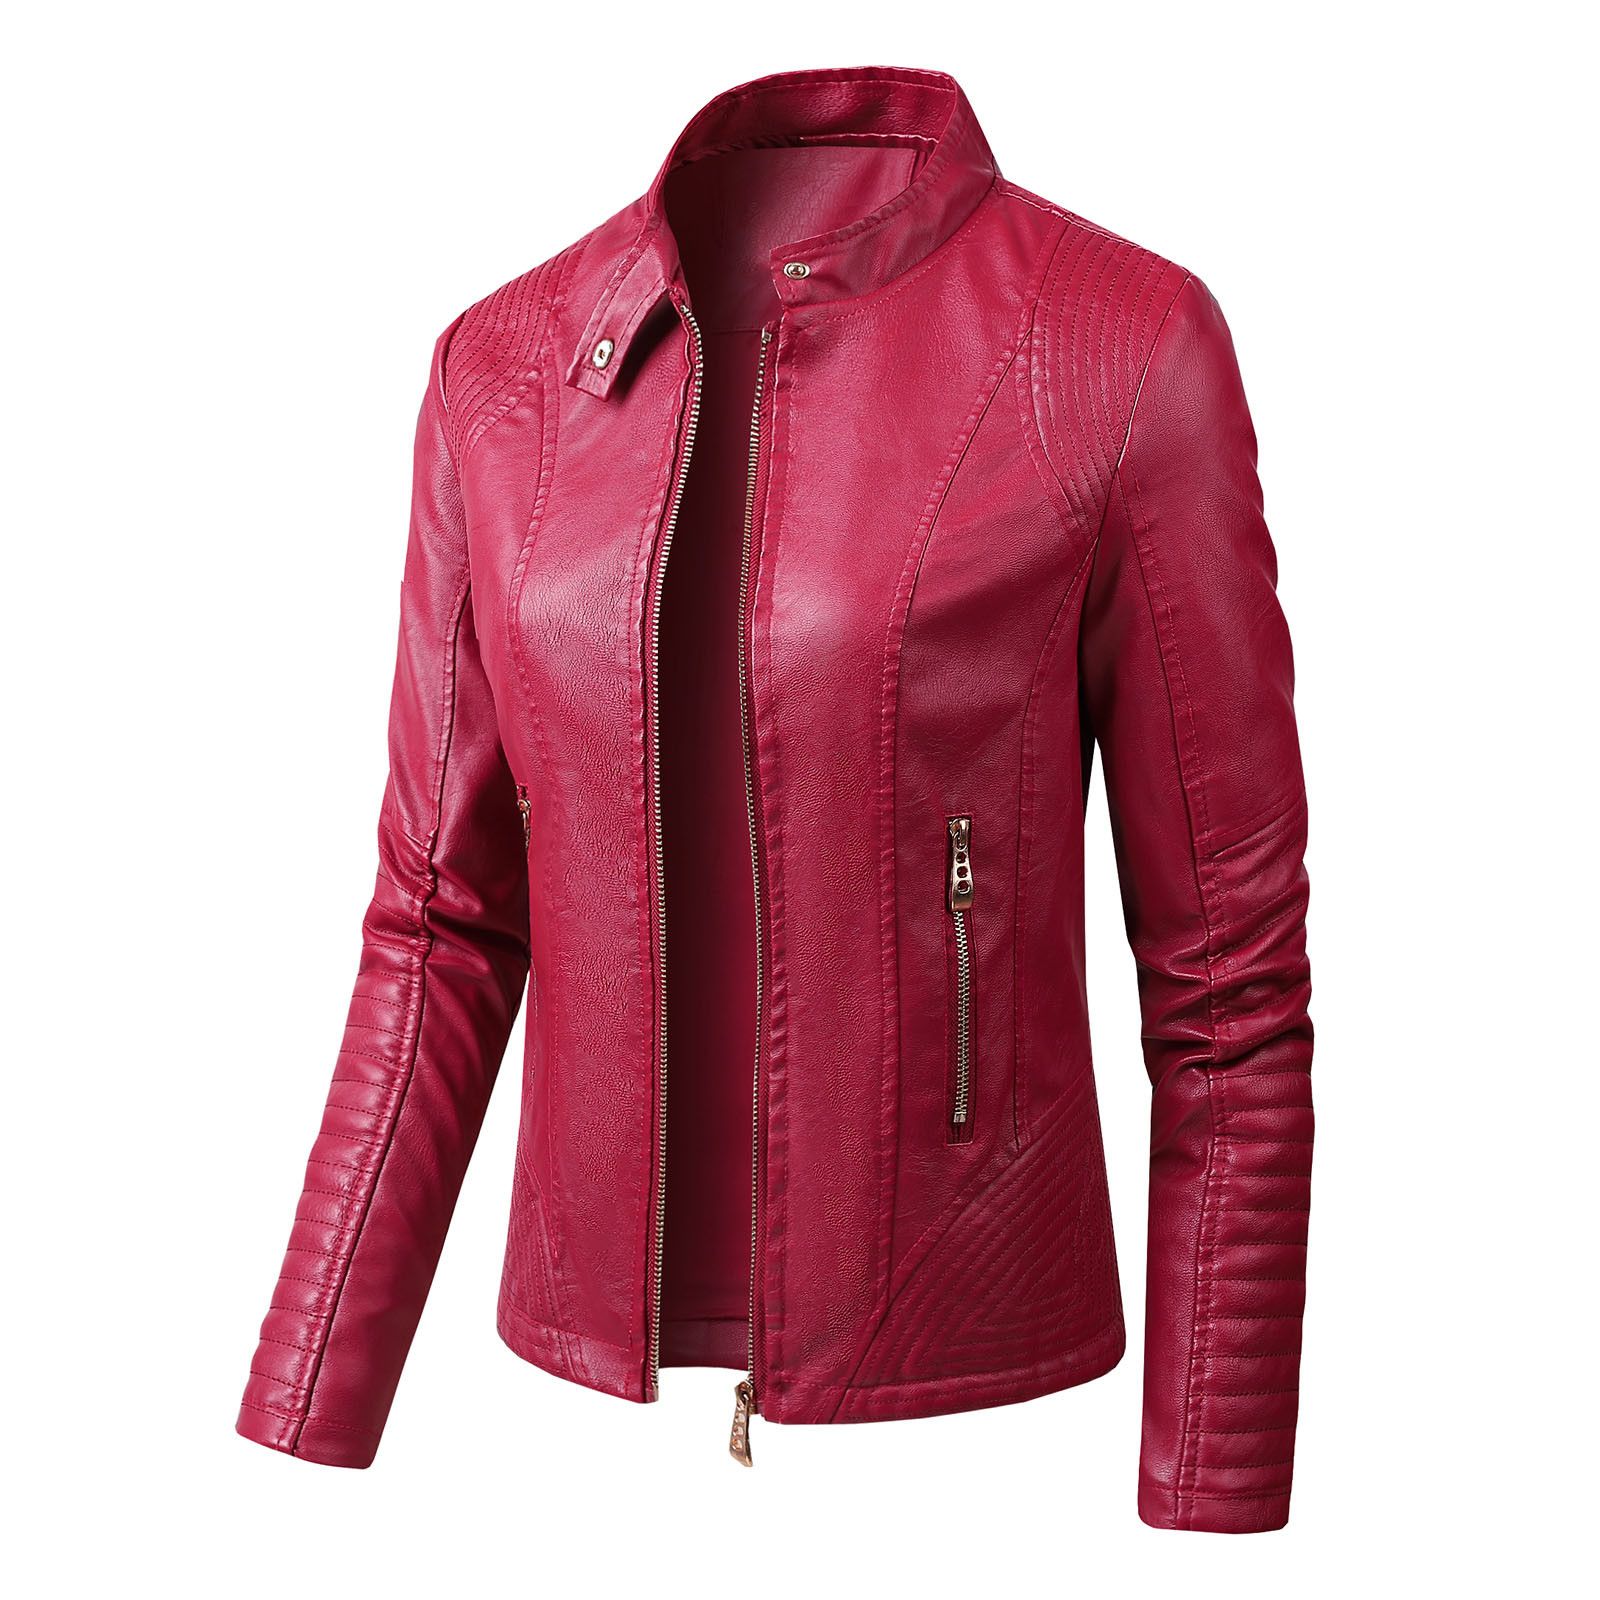 Fanxing Clearance Deals Bomber Leather Jacket Women Fitted Fashion Winter Coats Long Sleeve Full Zip Outwear Stand Collar Motorcycle Jackets - image 3 of 6